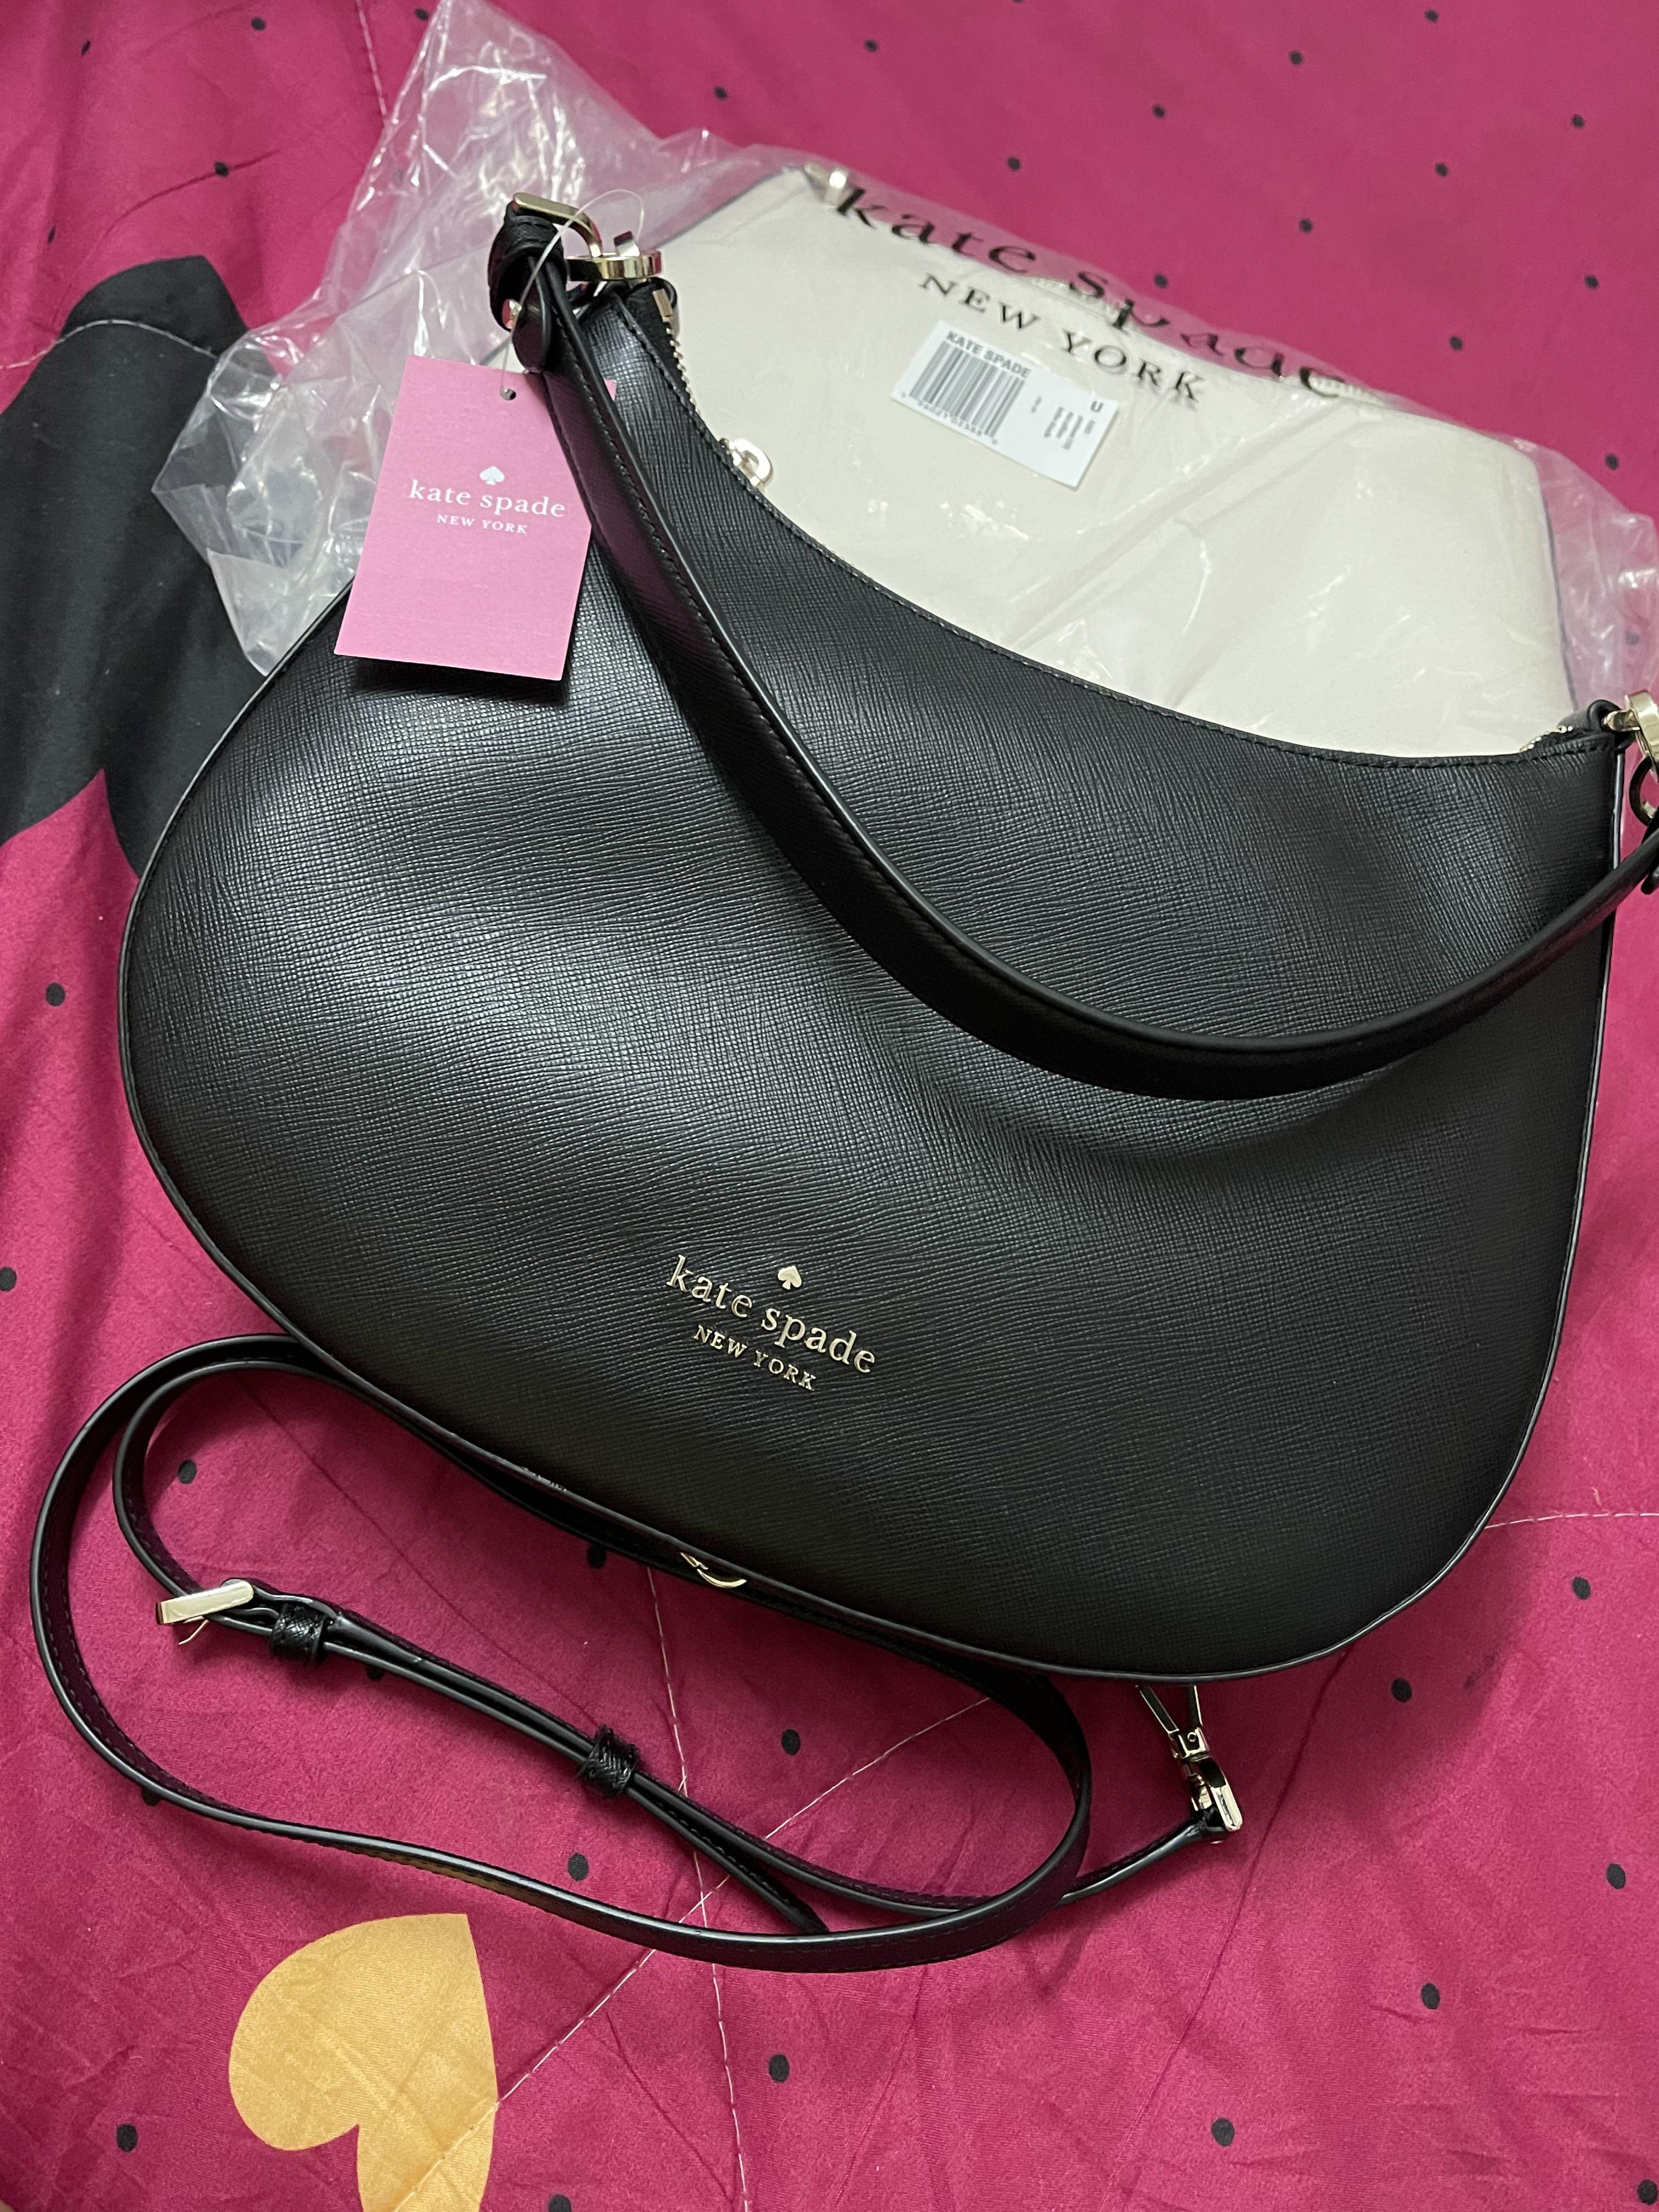 Kate Spade Staci Saffiano Leather Shoulder Bag Black K6042, Luxury, Bags &  Wallets on Carousell